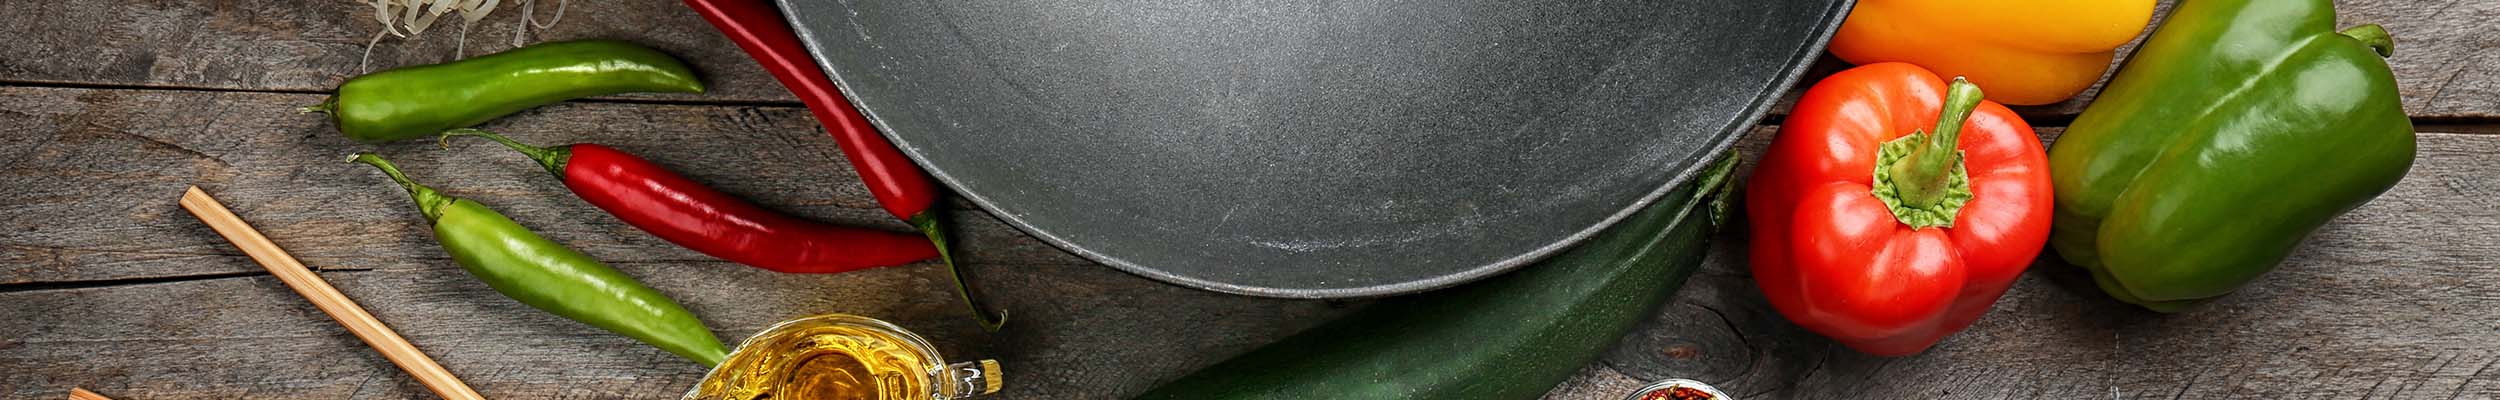 Double Handle Cast Iron Wok with Veggies for Chef's Kitchen